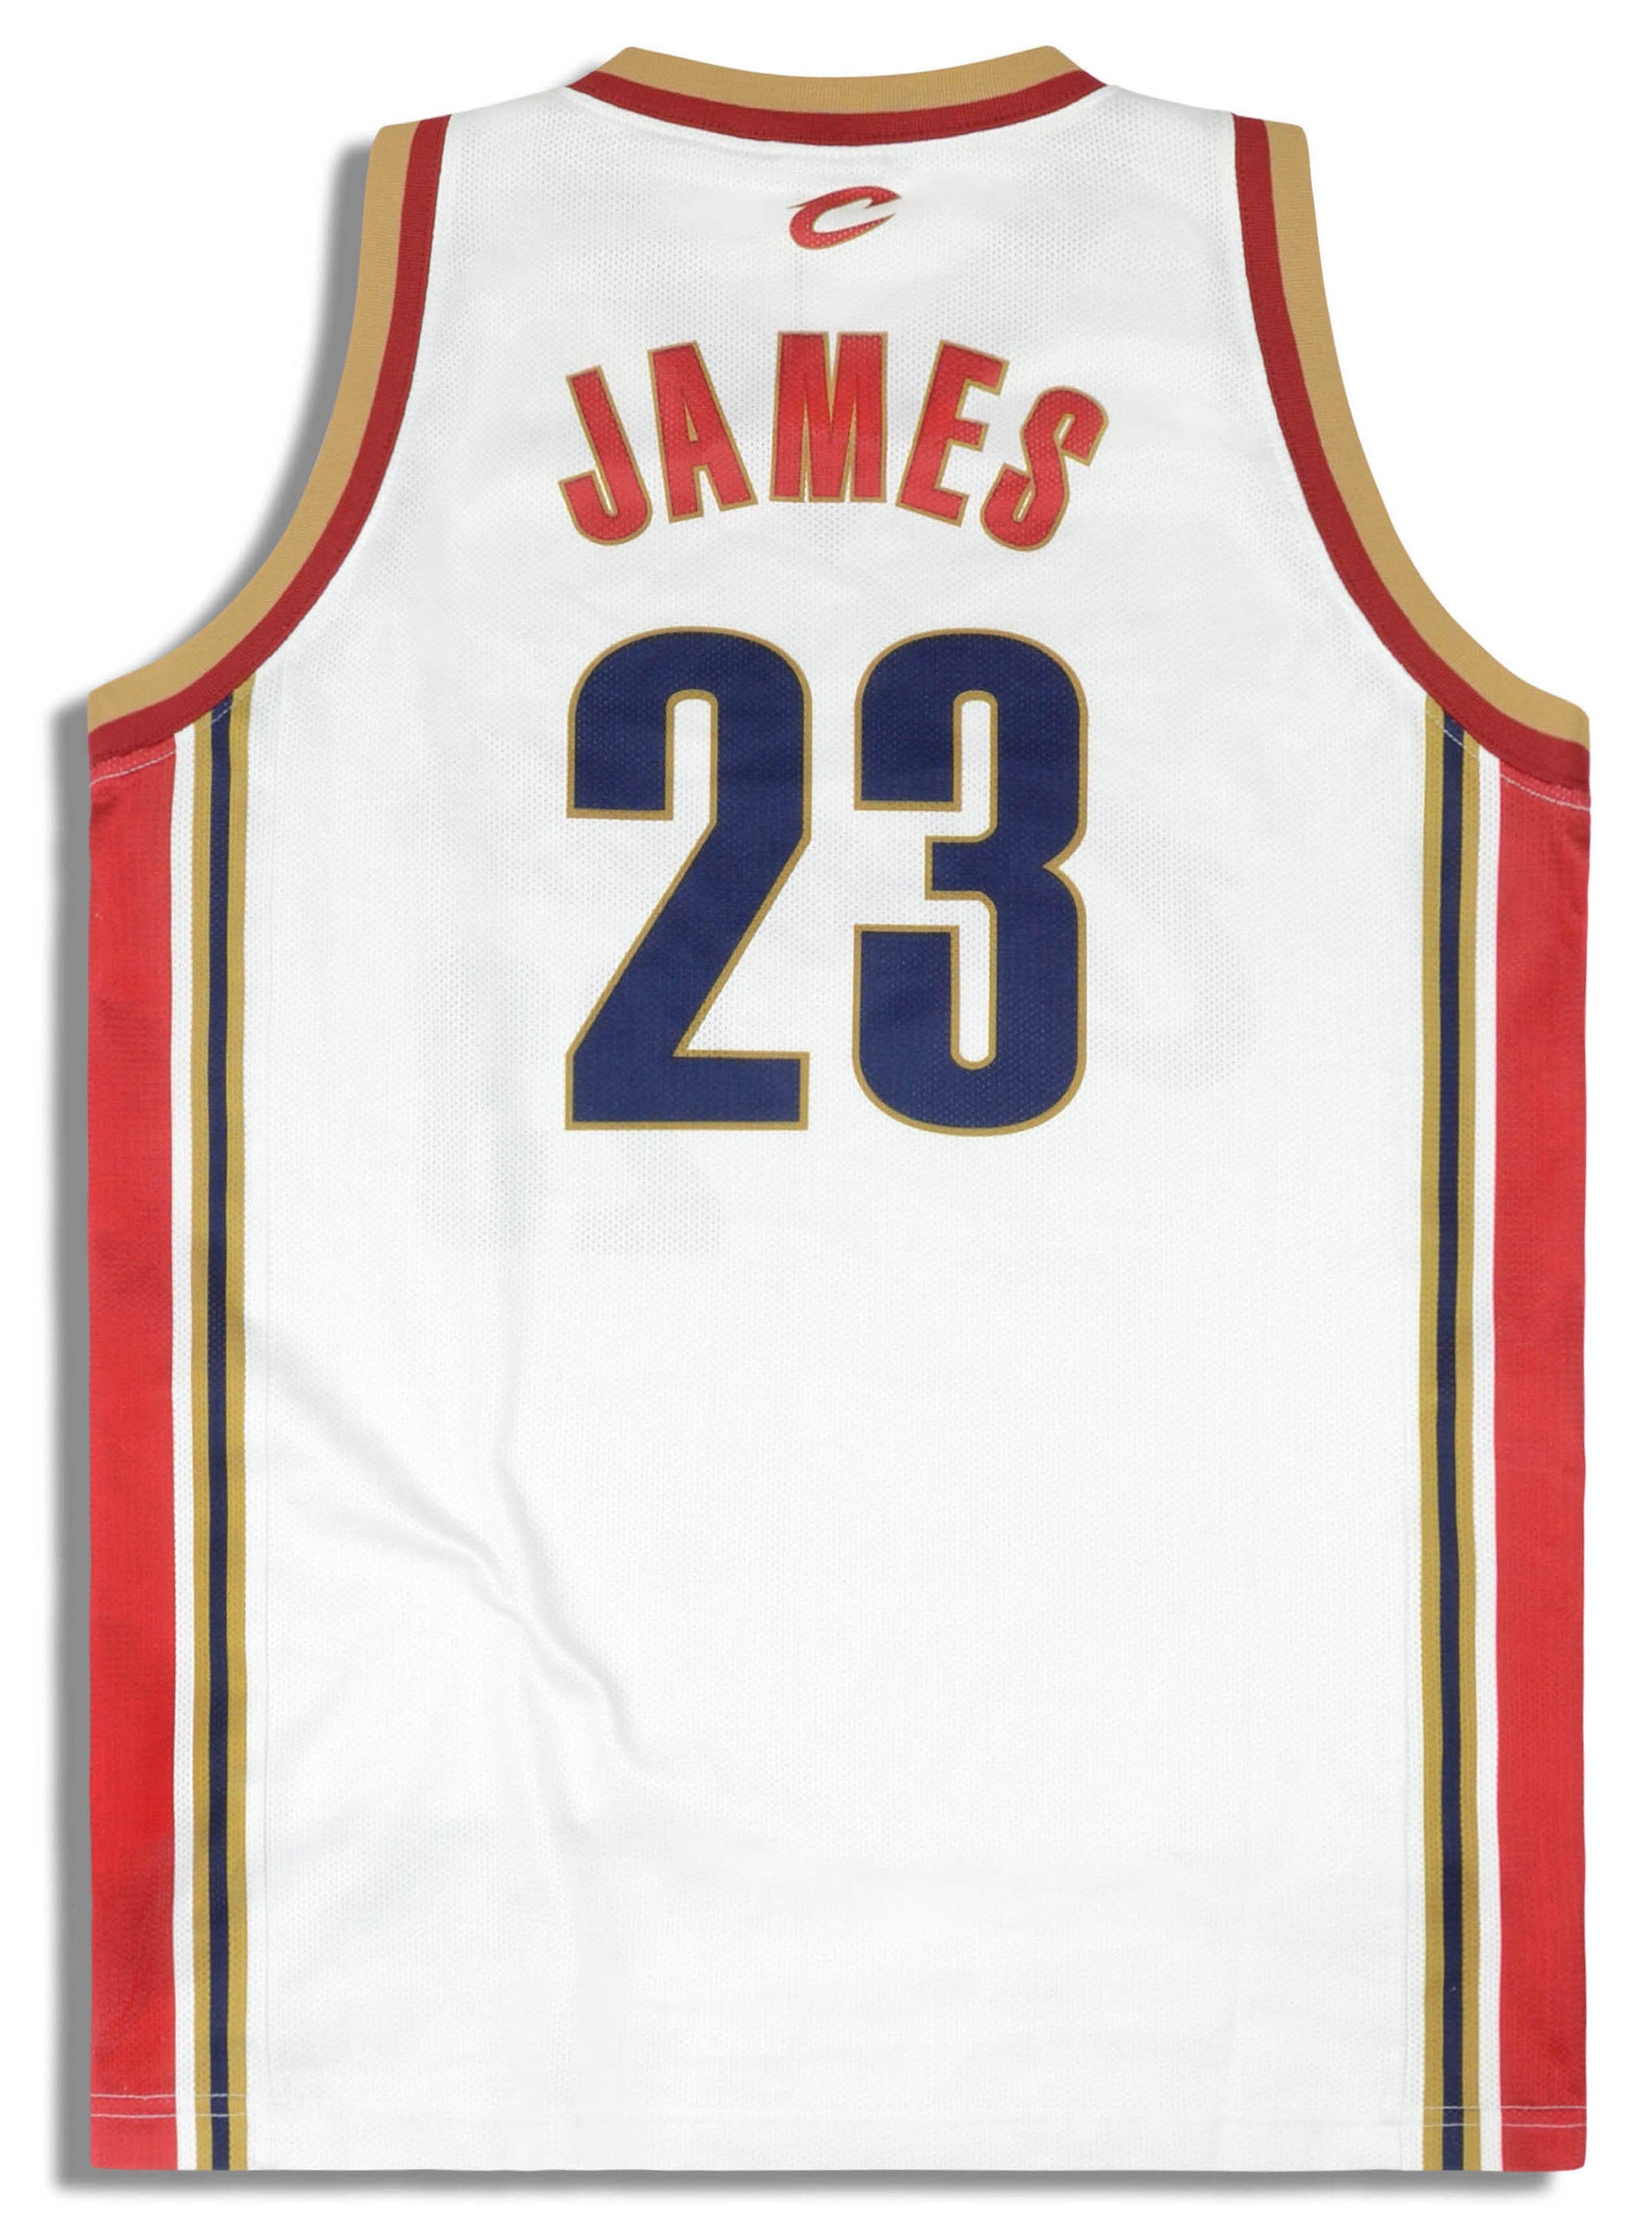 2003-10 CLEVELAND CAVALIERS JAMES #23 CHAMPION JERSEY (HOME) XS